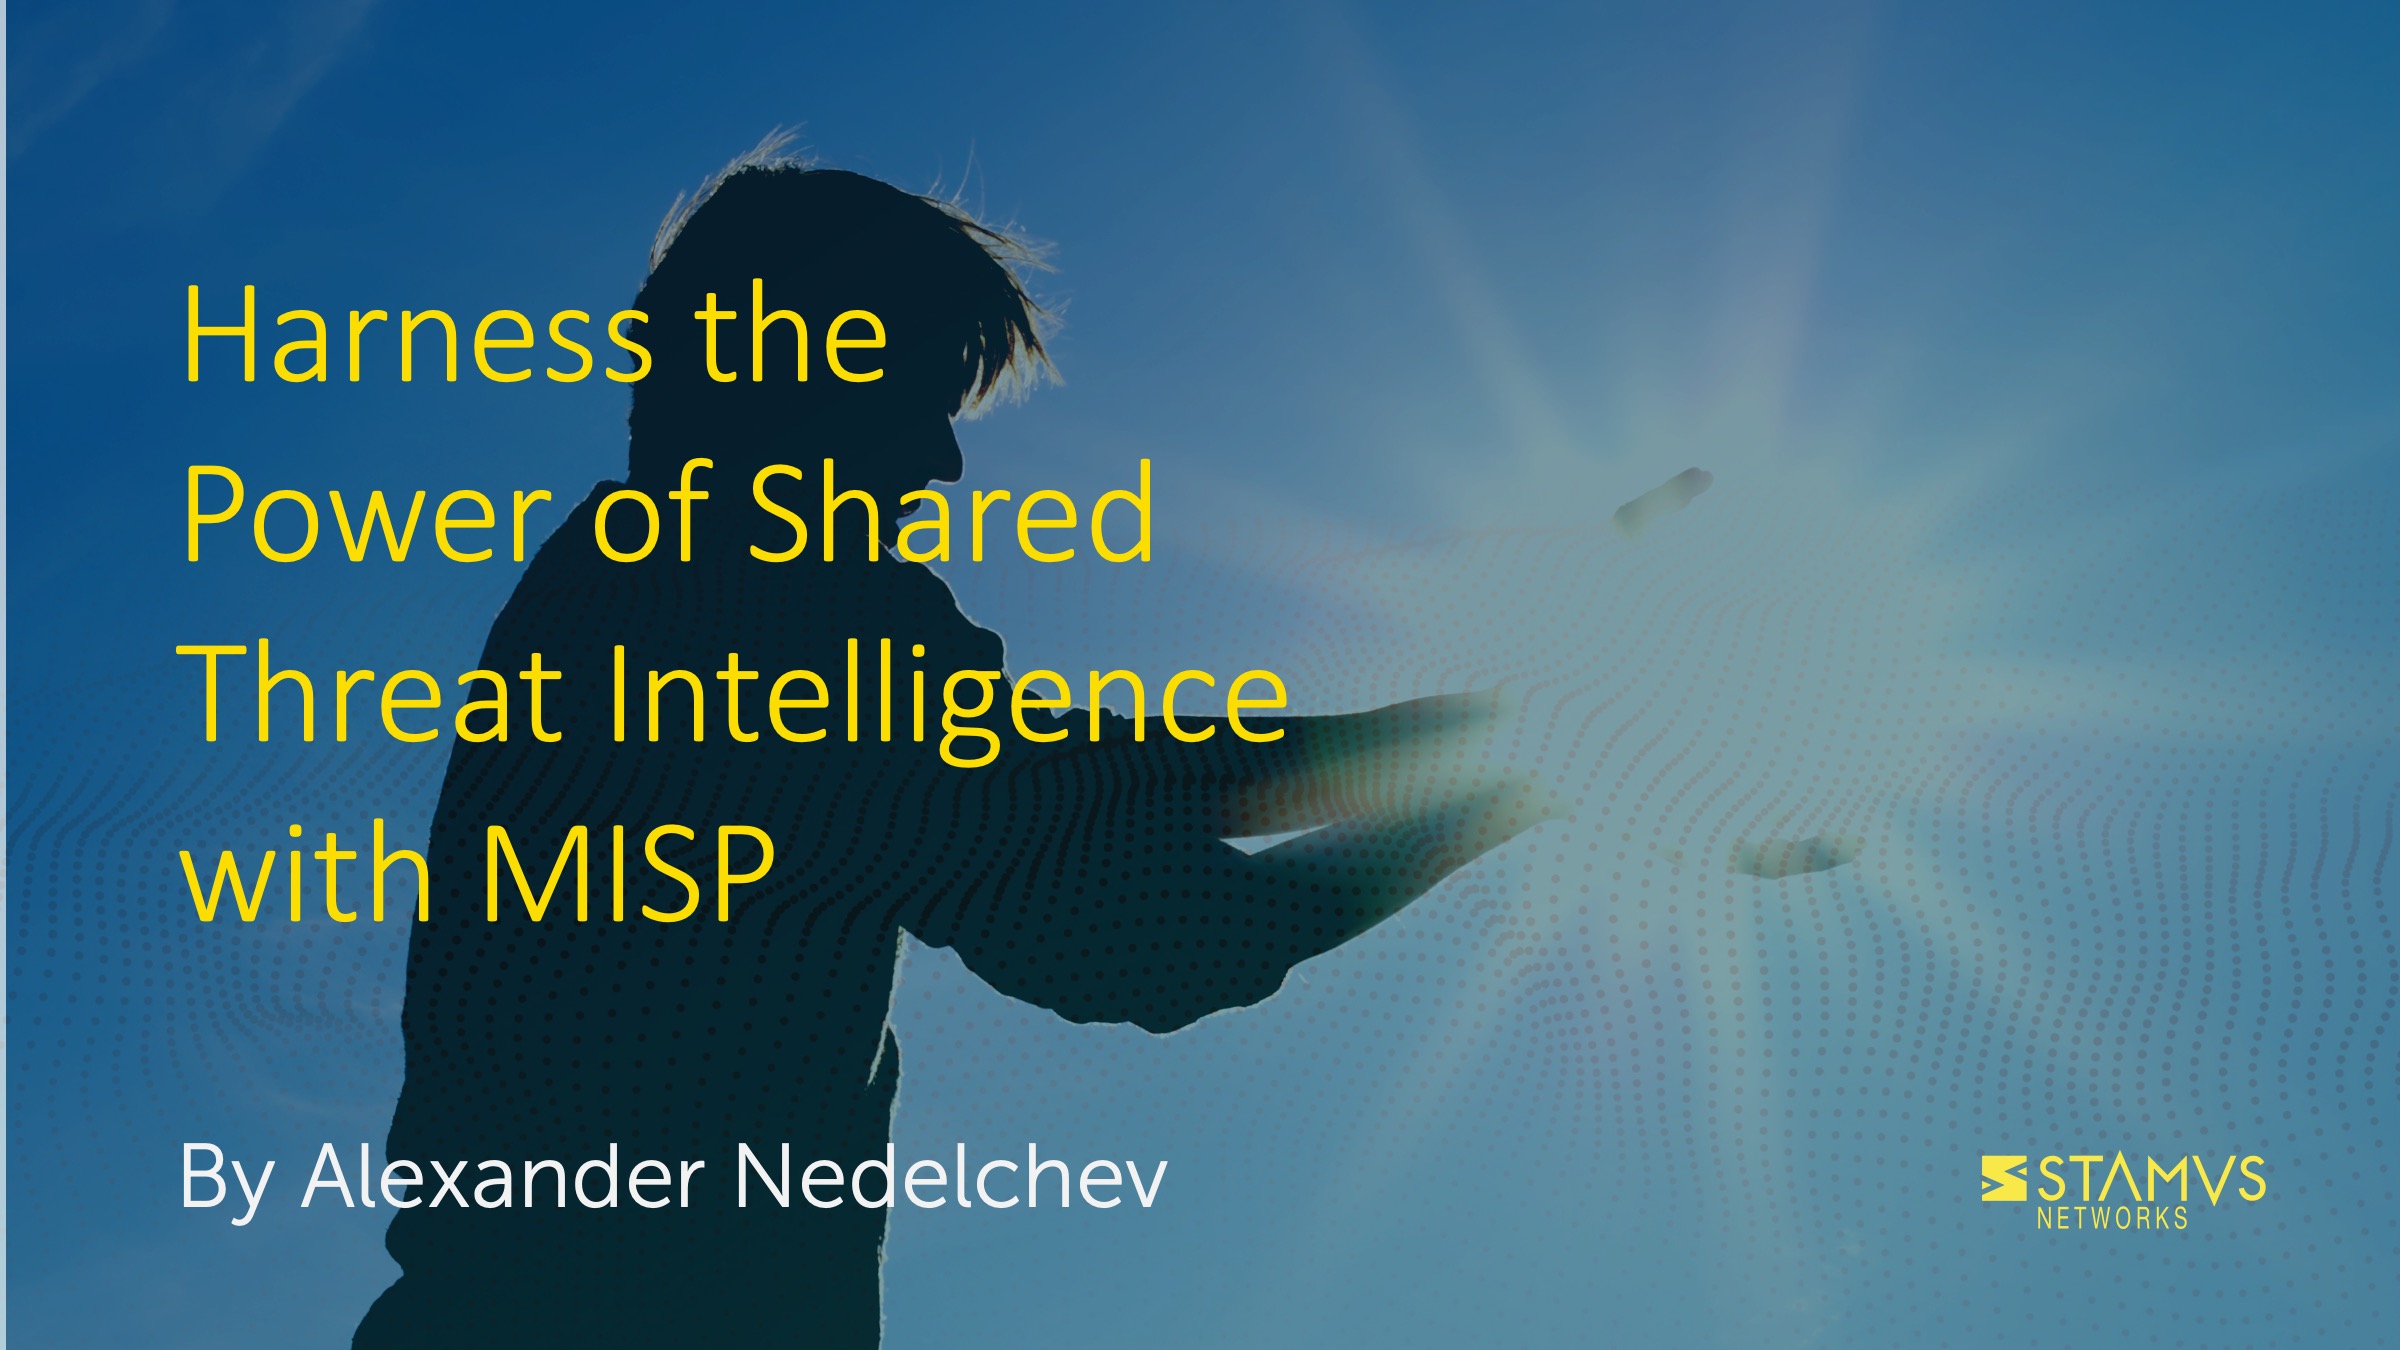 Harness the Power of Shared Threat Intelligence with MISP by Alexander Nedelchev